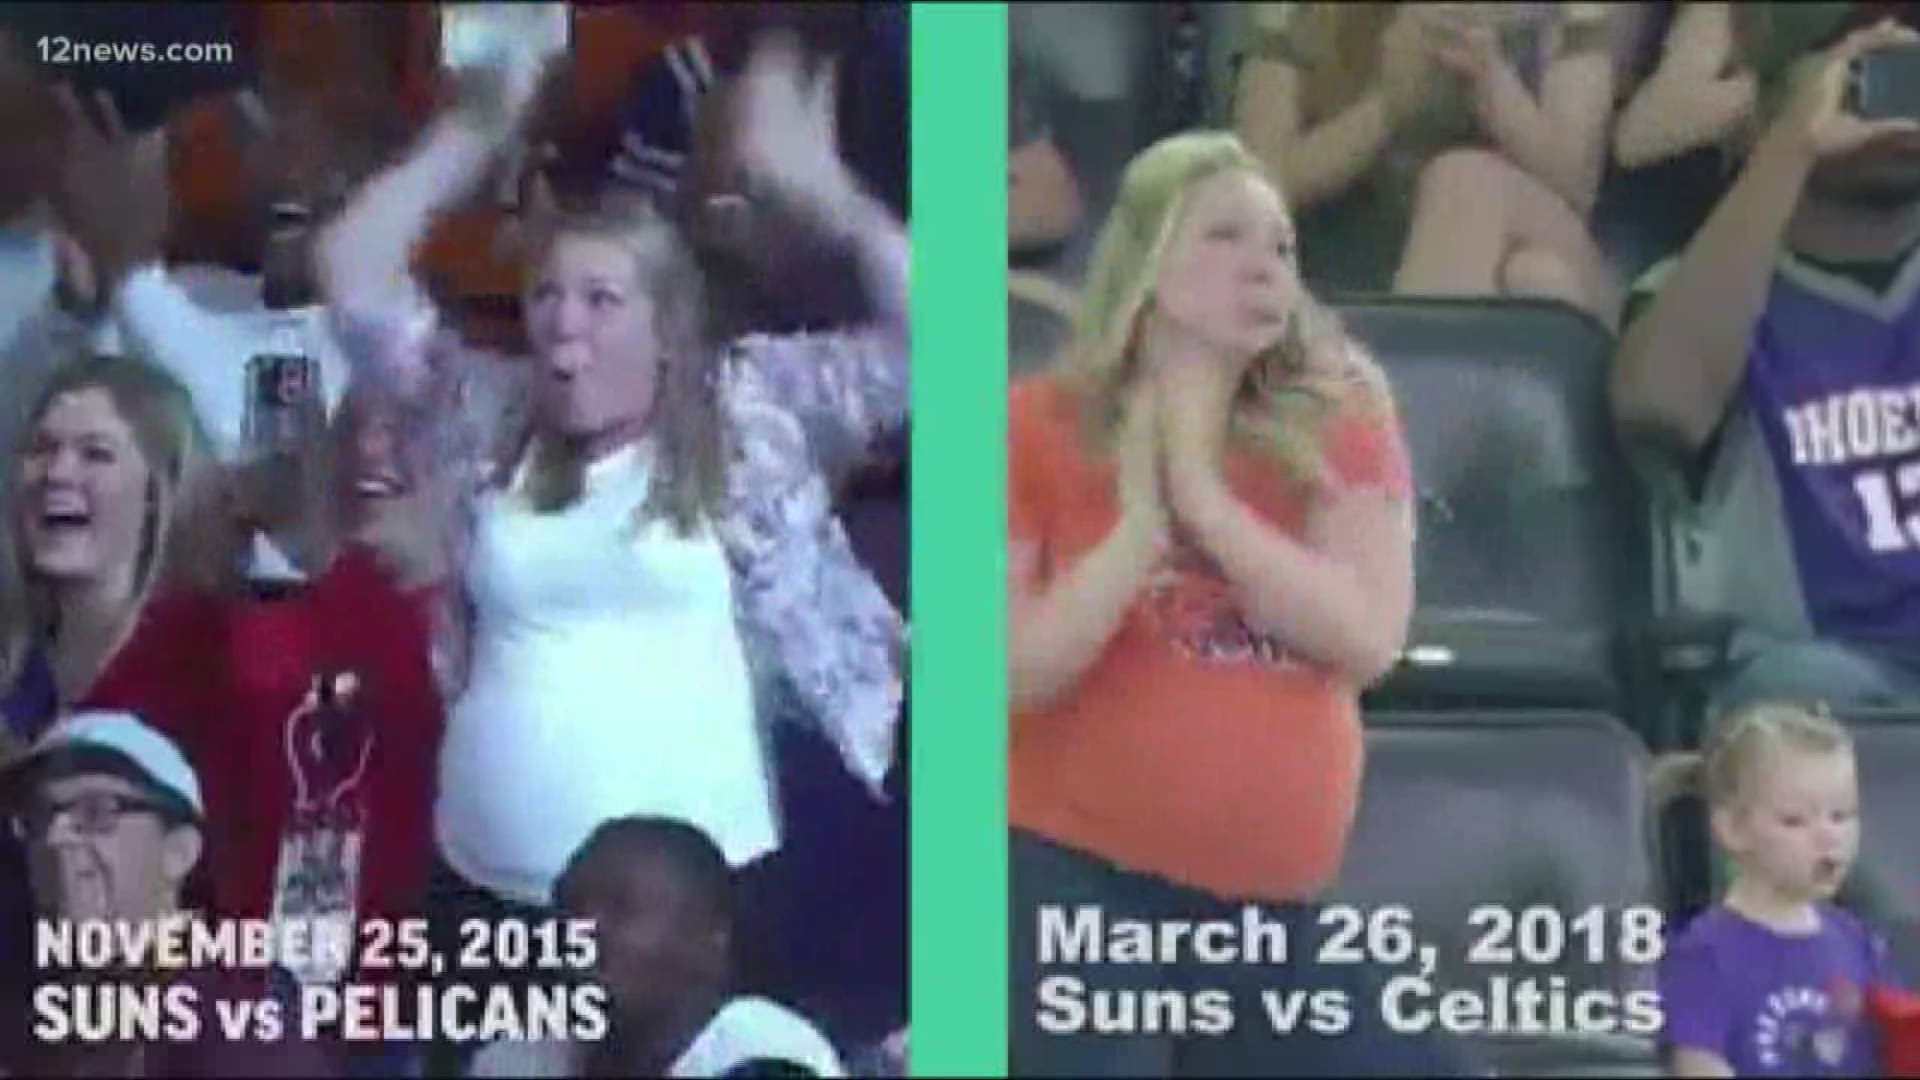 Whitney Collins chats with Emma Jade about how she danced her way into the hearts of Phoenix Suns fans and achieved internet fame.